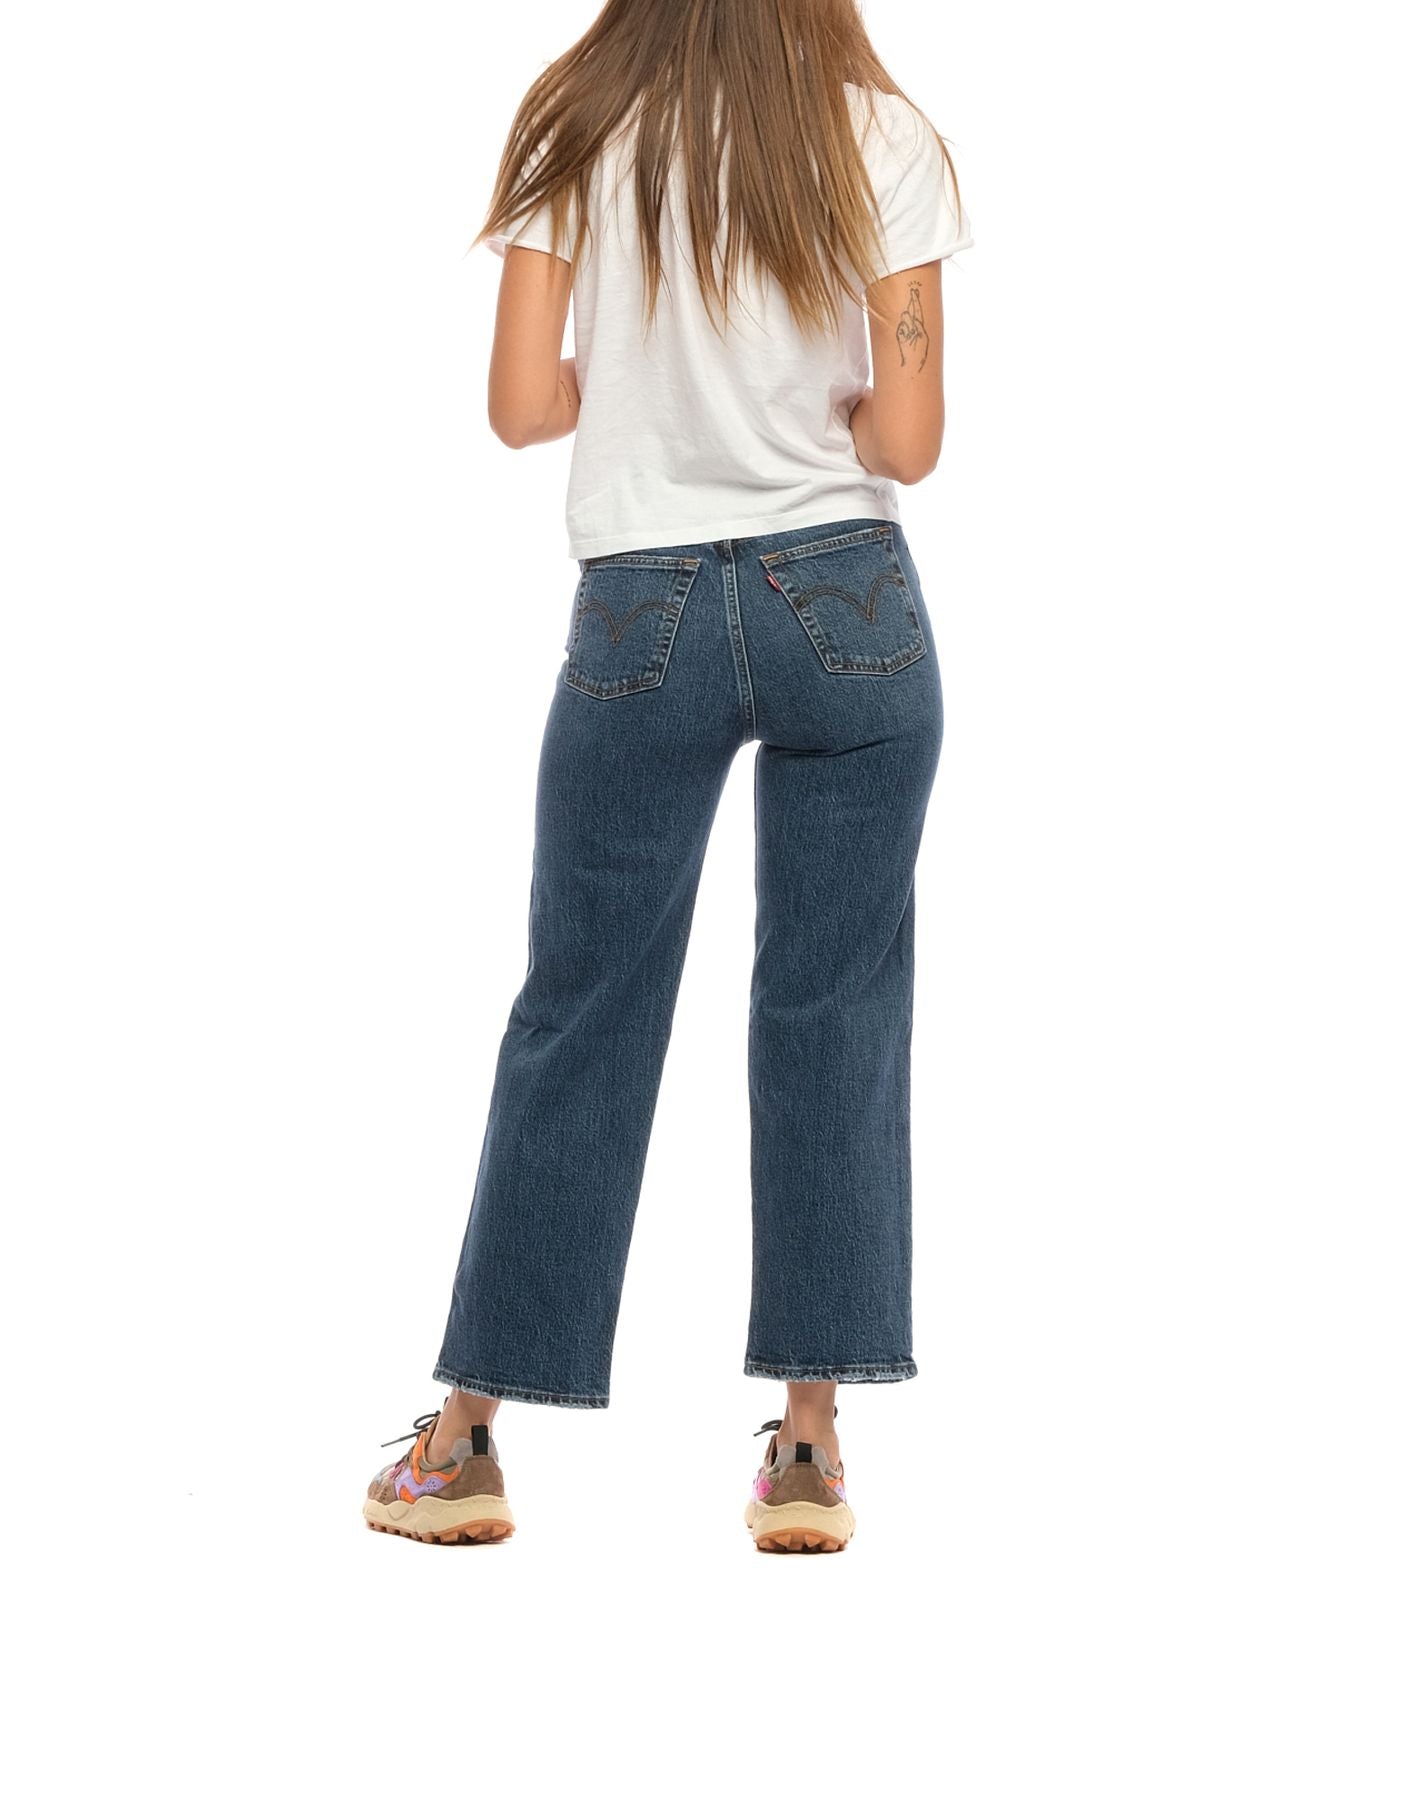 Jeans femme 726930163 Valley View Levi's